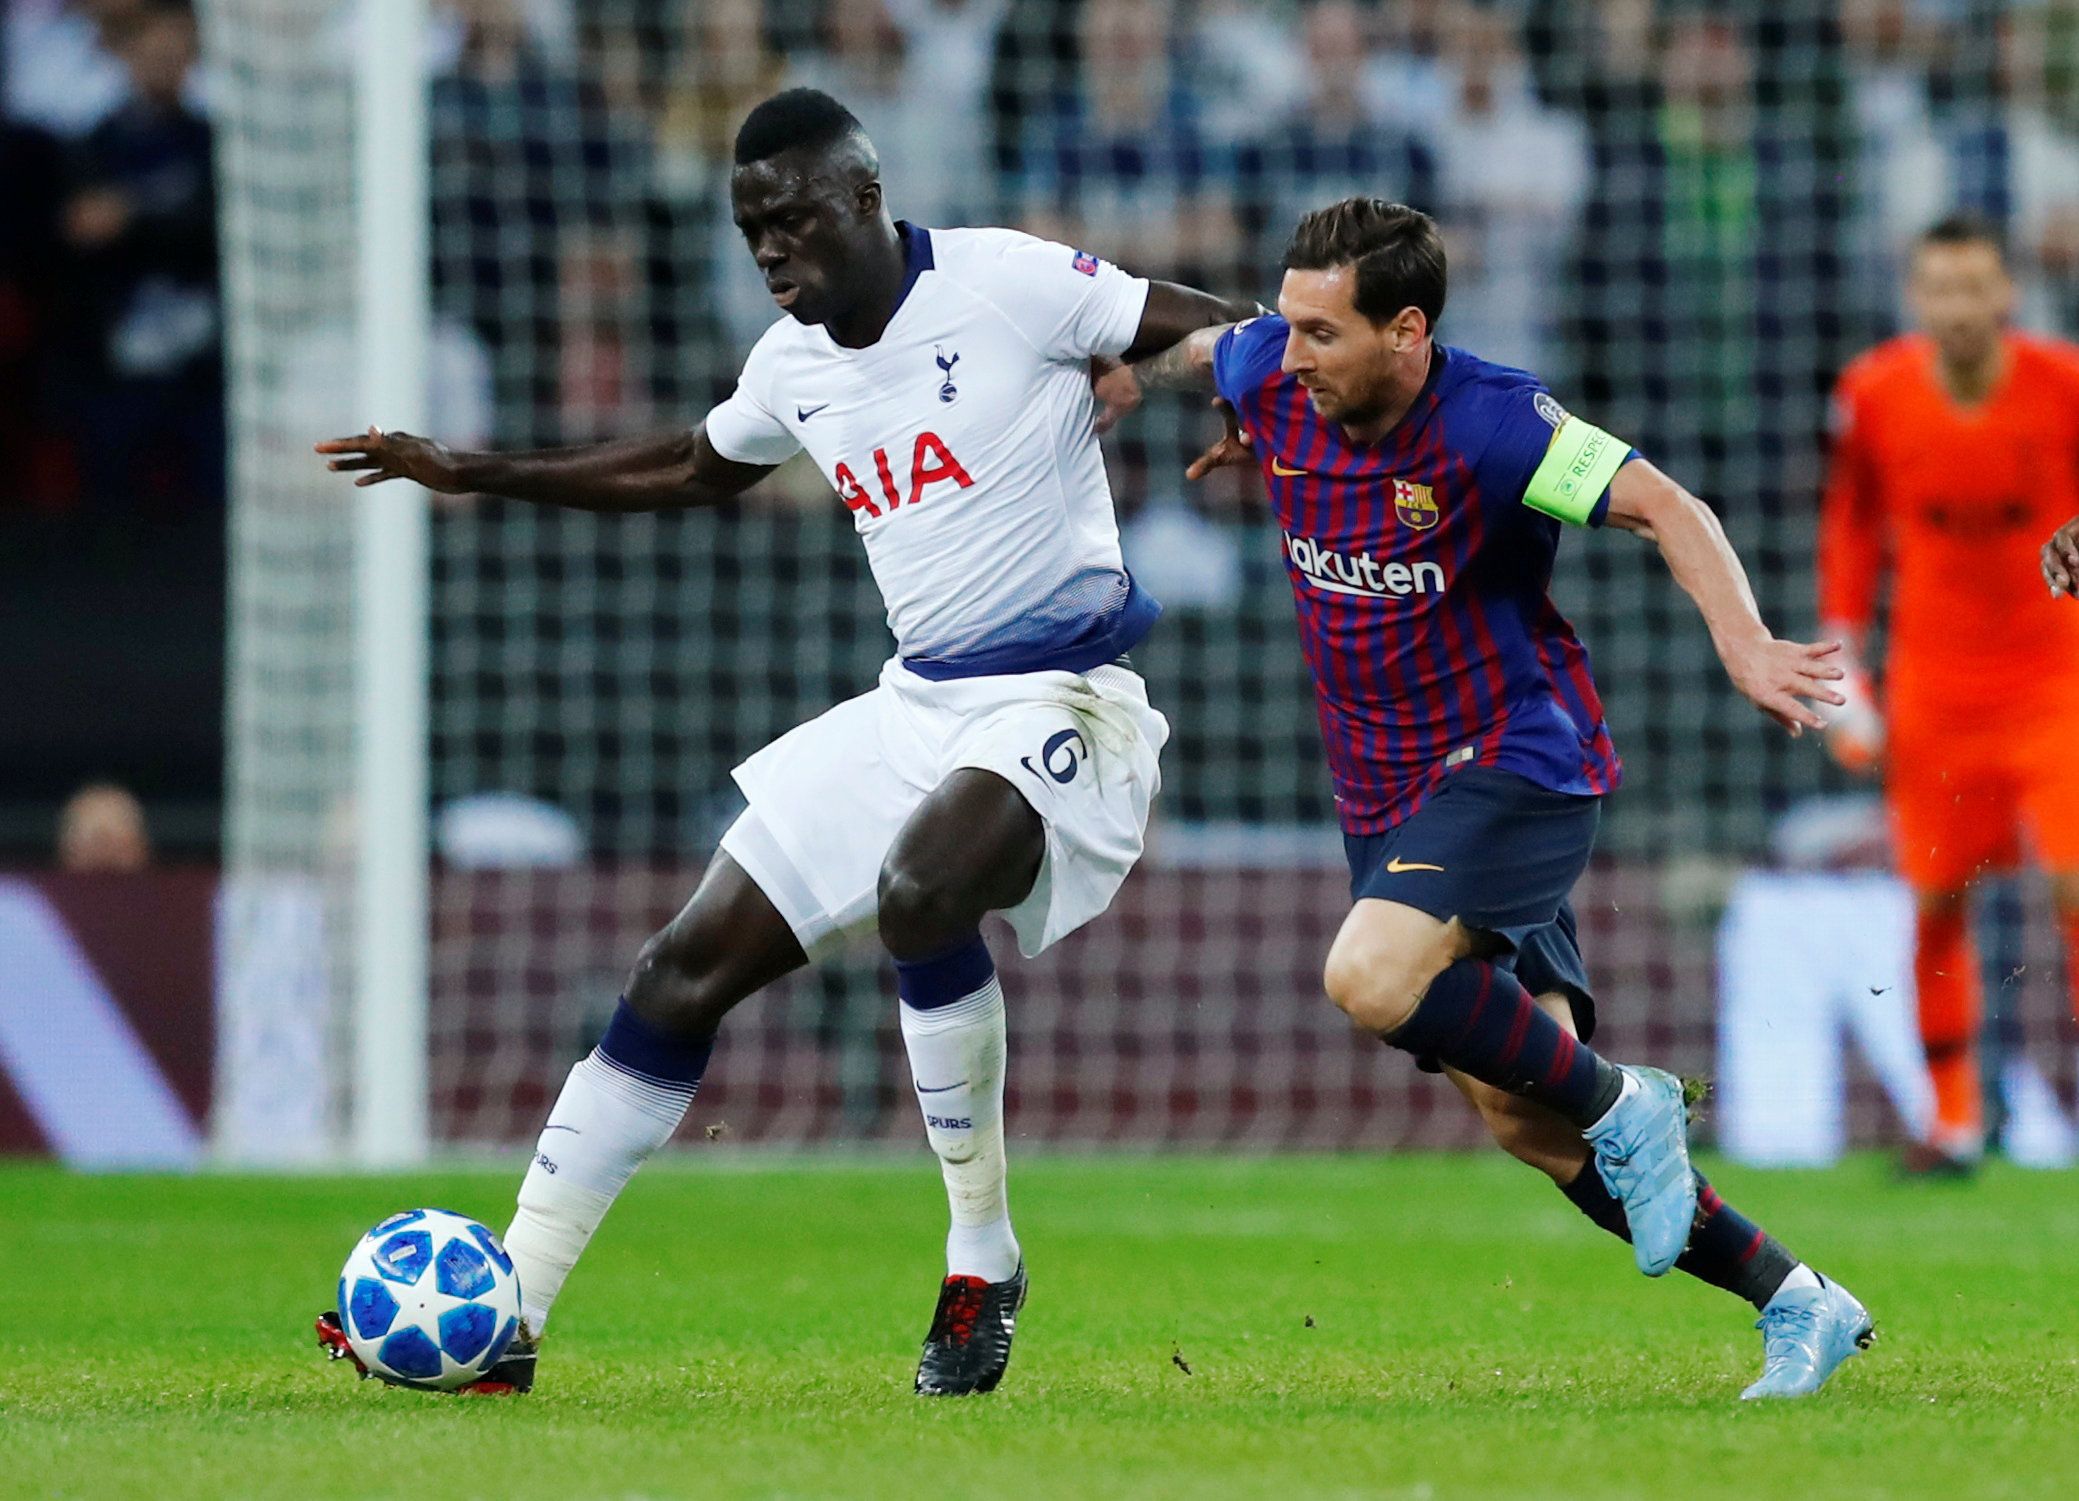 Soccer Football - Champions League - Group Stage - Group B - Tottenham Hotspur v FC Barcelona - Wembley Stadium, London, Britain - October 3, 2018  Tottenham's Davinson Sanchez in action with Barcelona's Lionel Messi      REUTERS/Eddie Keogh